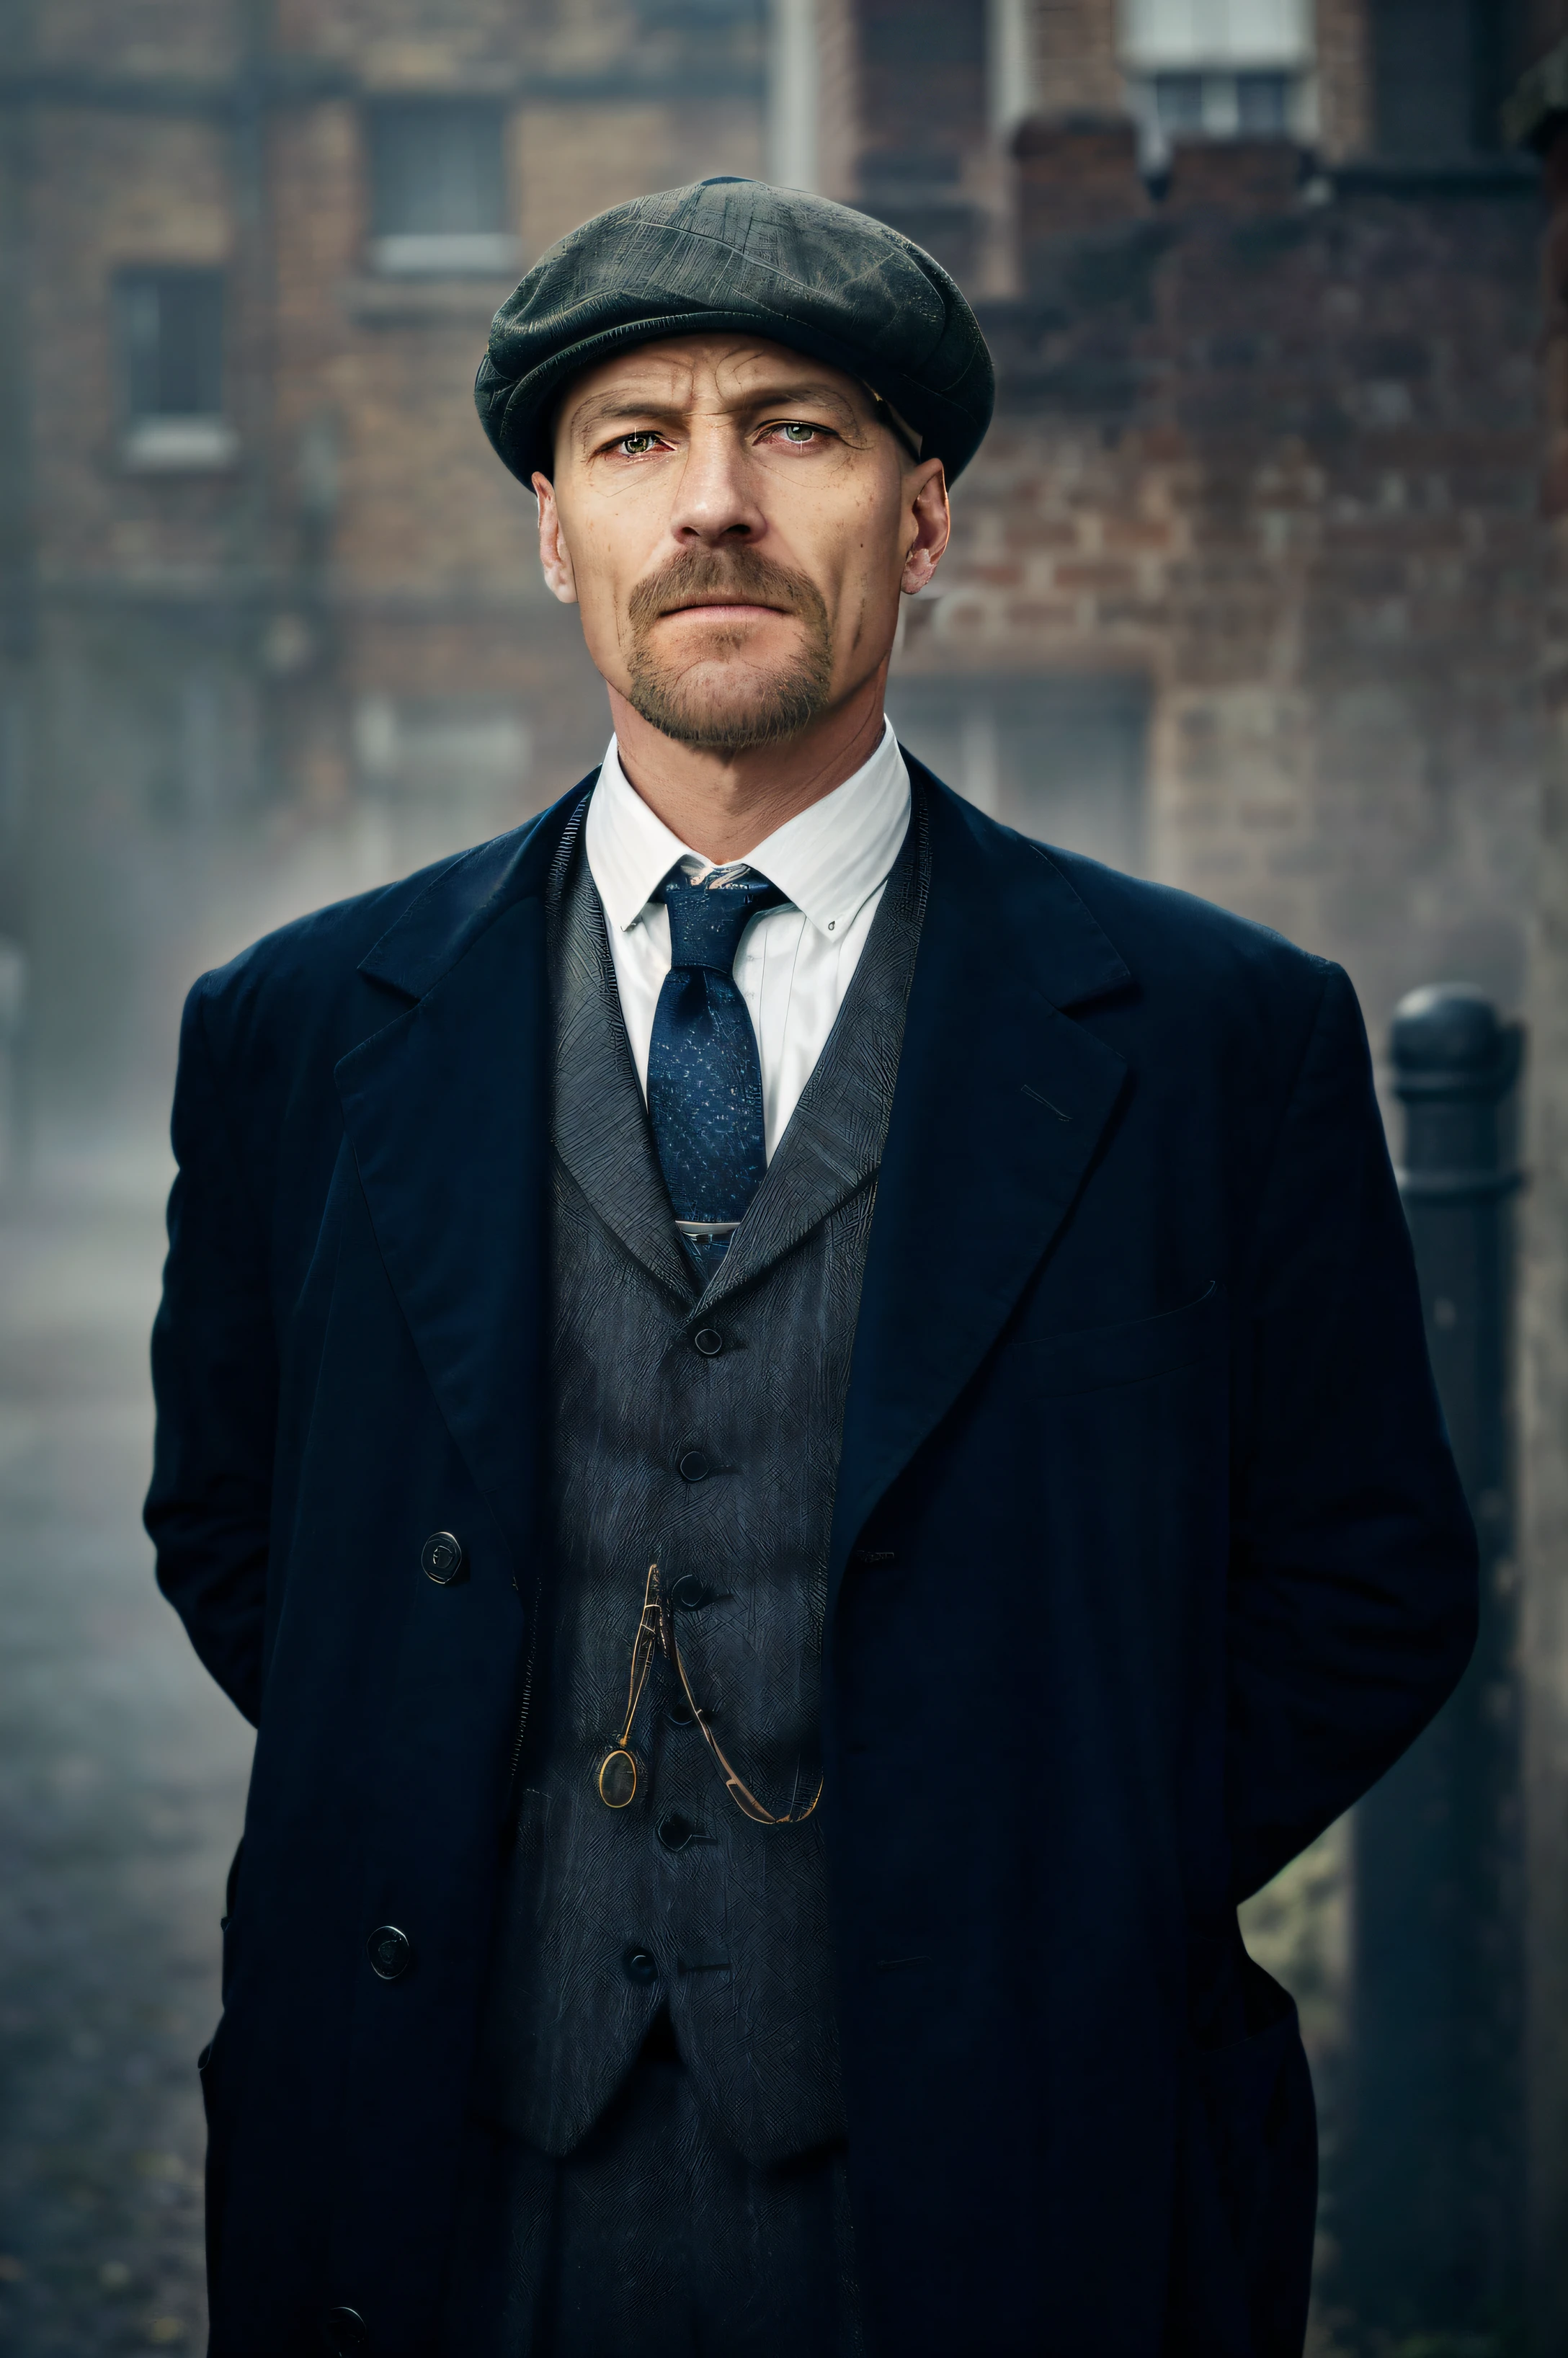 there is a man in a suit and tie standing in a street, peaky blinders, costumes from peaky blinders, peaky blinders (2018), peaky blinders gang, inspired by Max Magnus Norman, tom hardy as henry dorsett case, sherlock holmes, portrait of sherlock holmes, a suited man in a hat